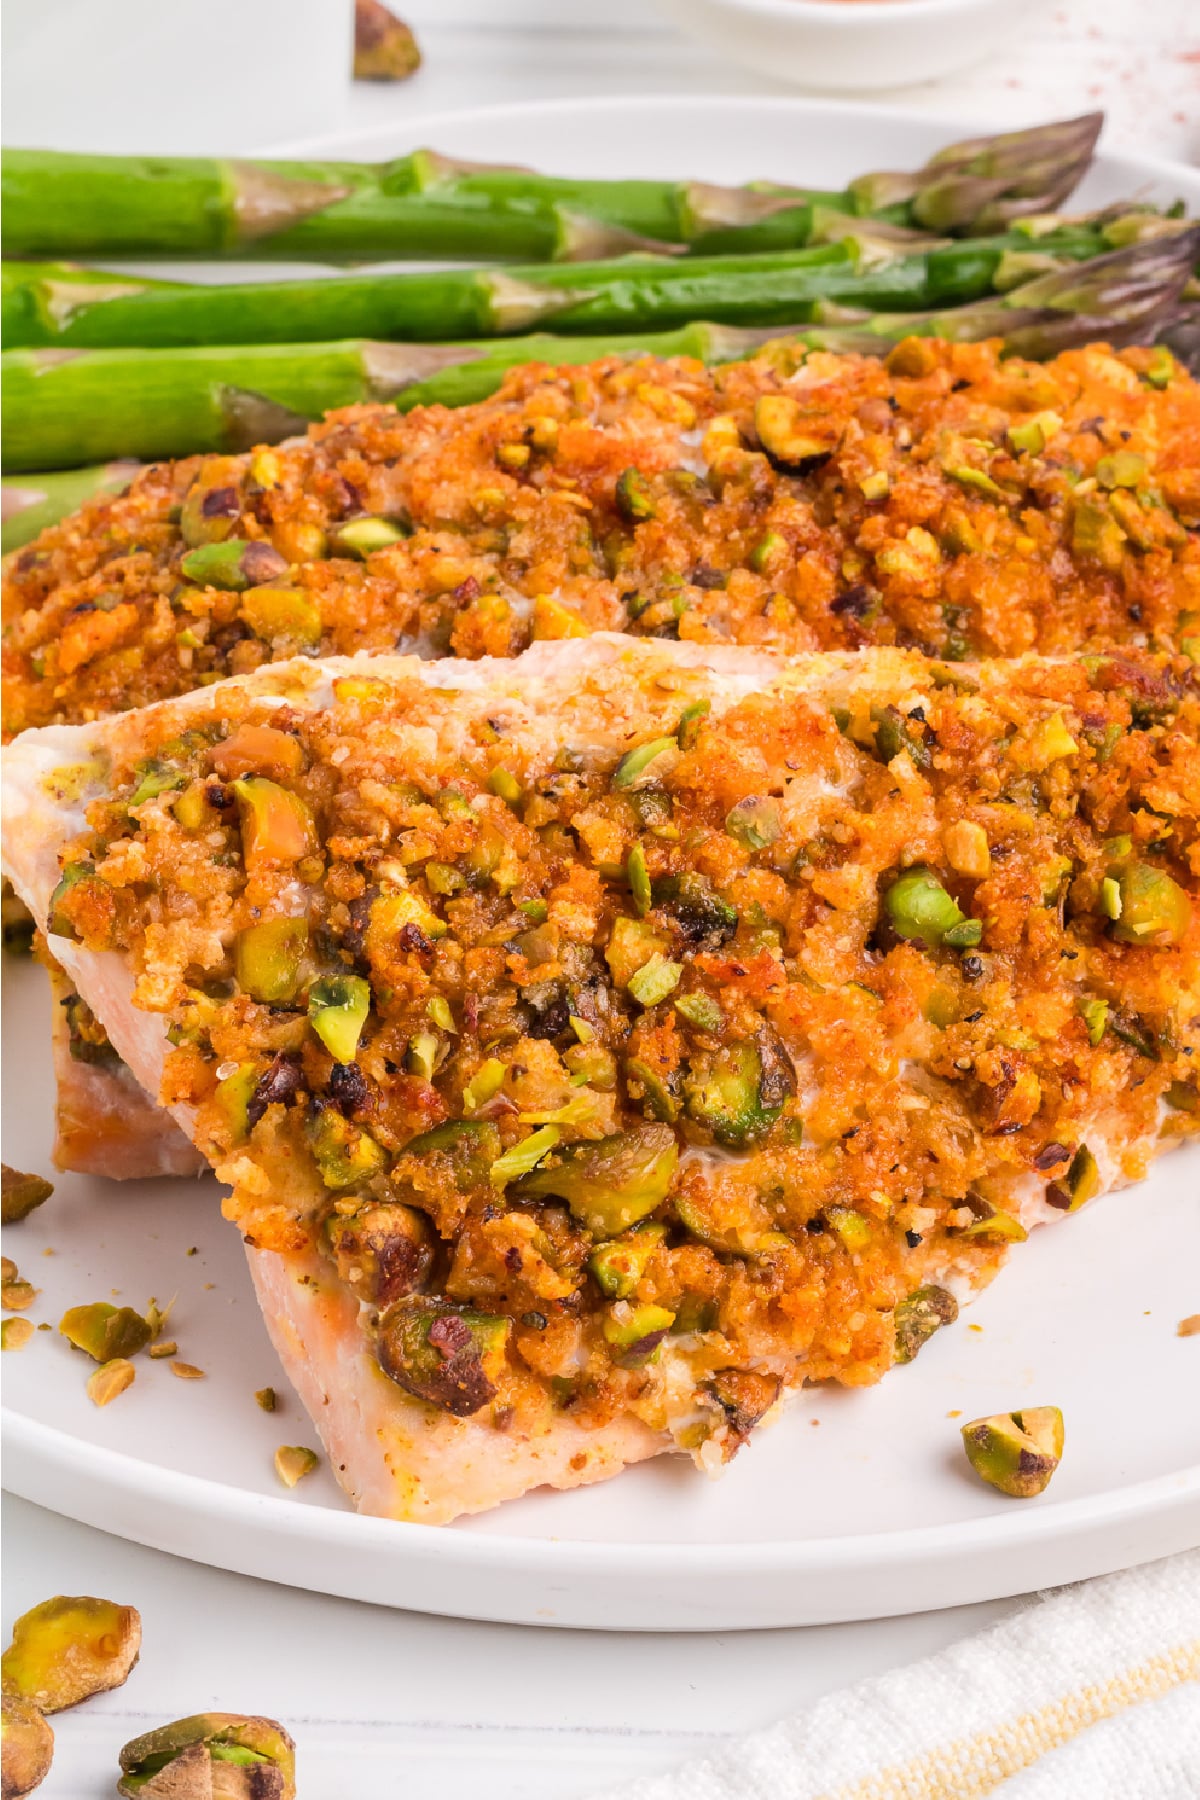 Two crusted pistachio salmon fillets on a plate from the side with asparagus next to it.